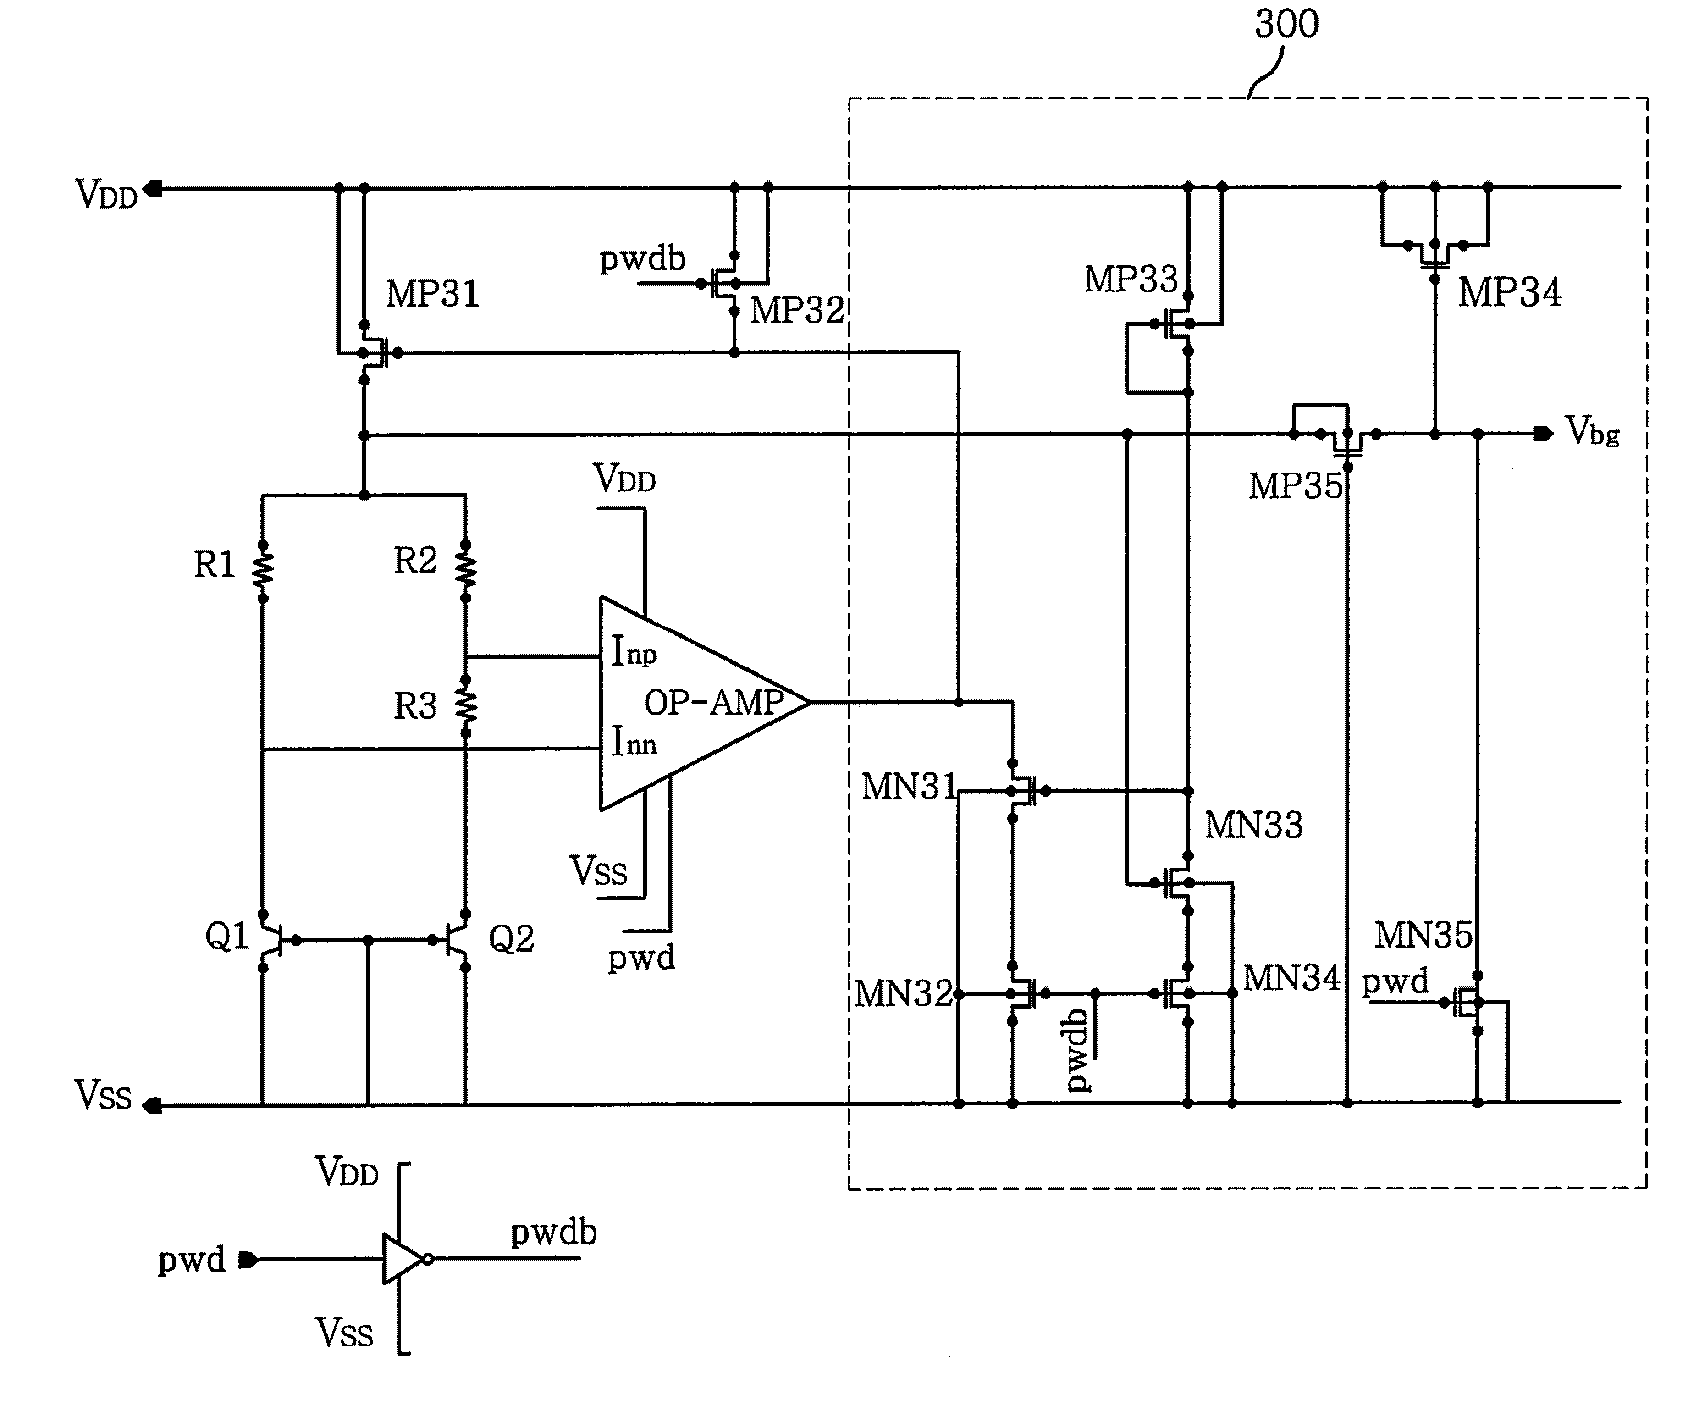 Start-up circuit for generating bandgap reference voltage